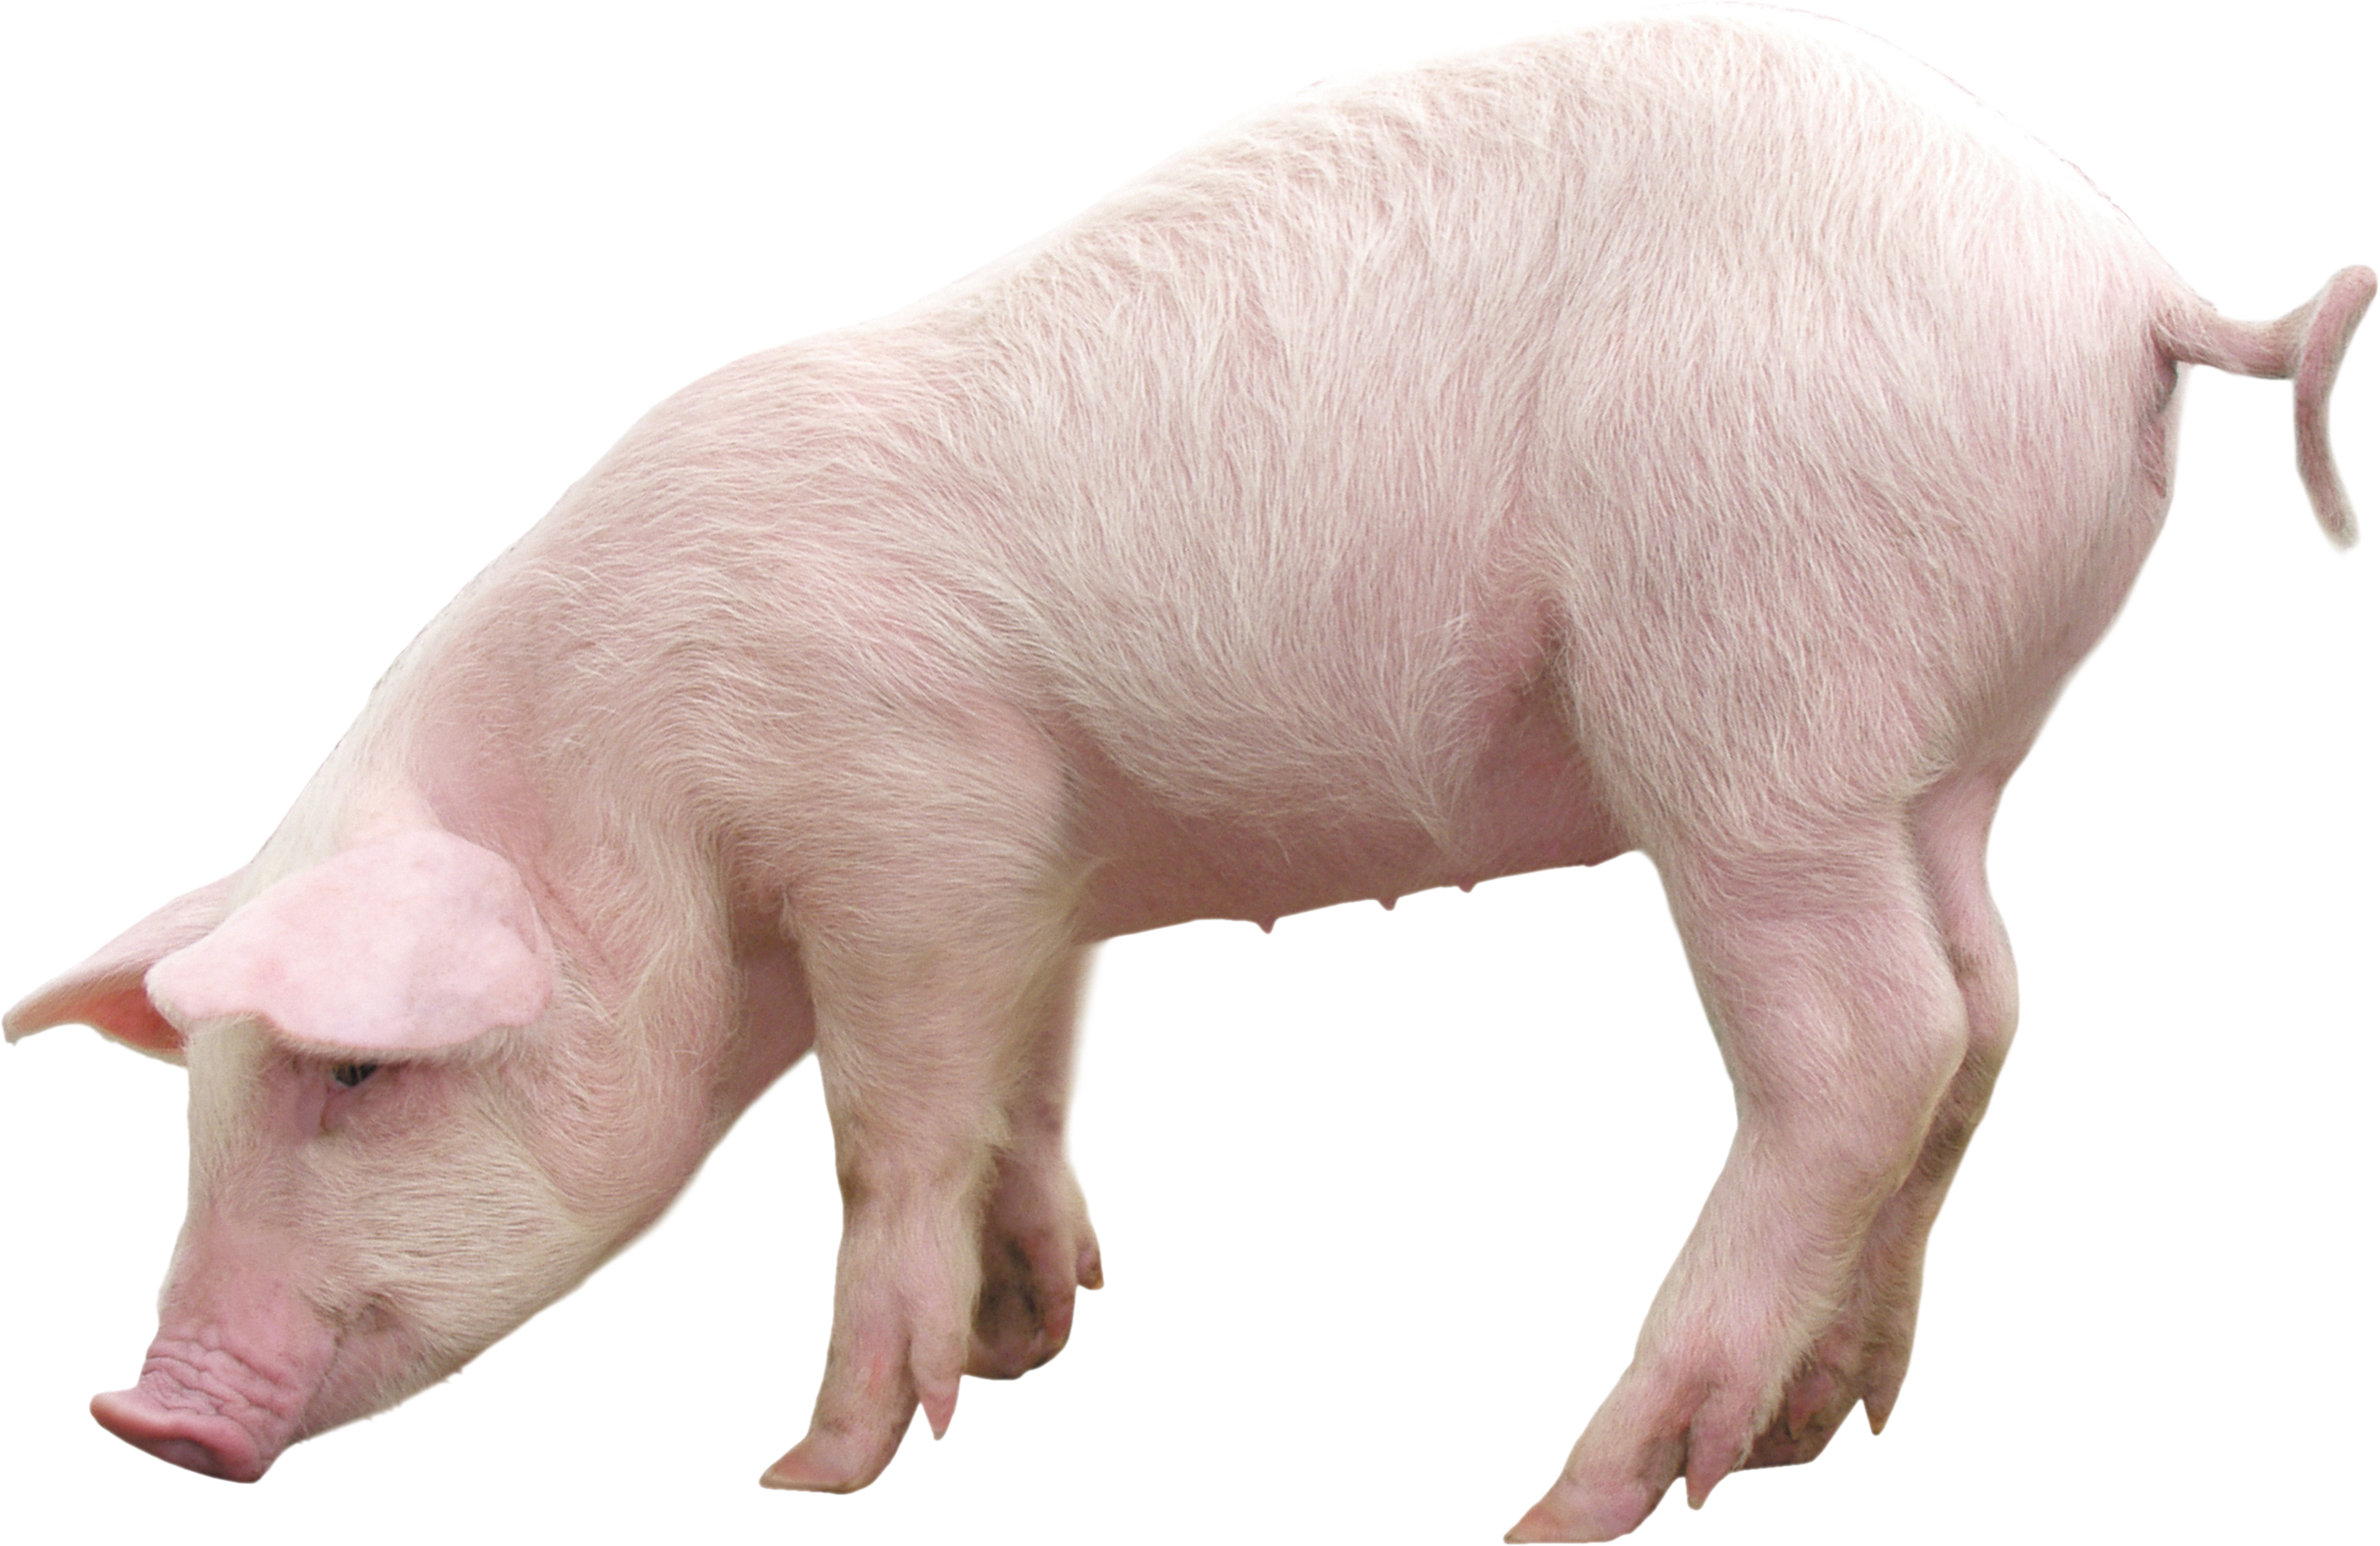 The witcher pig.png